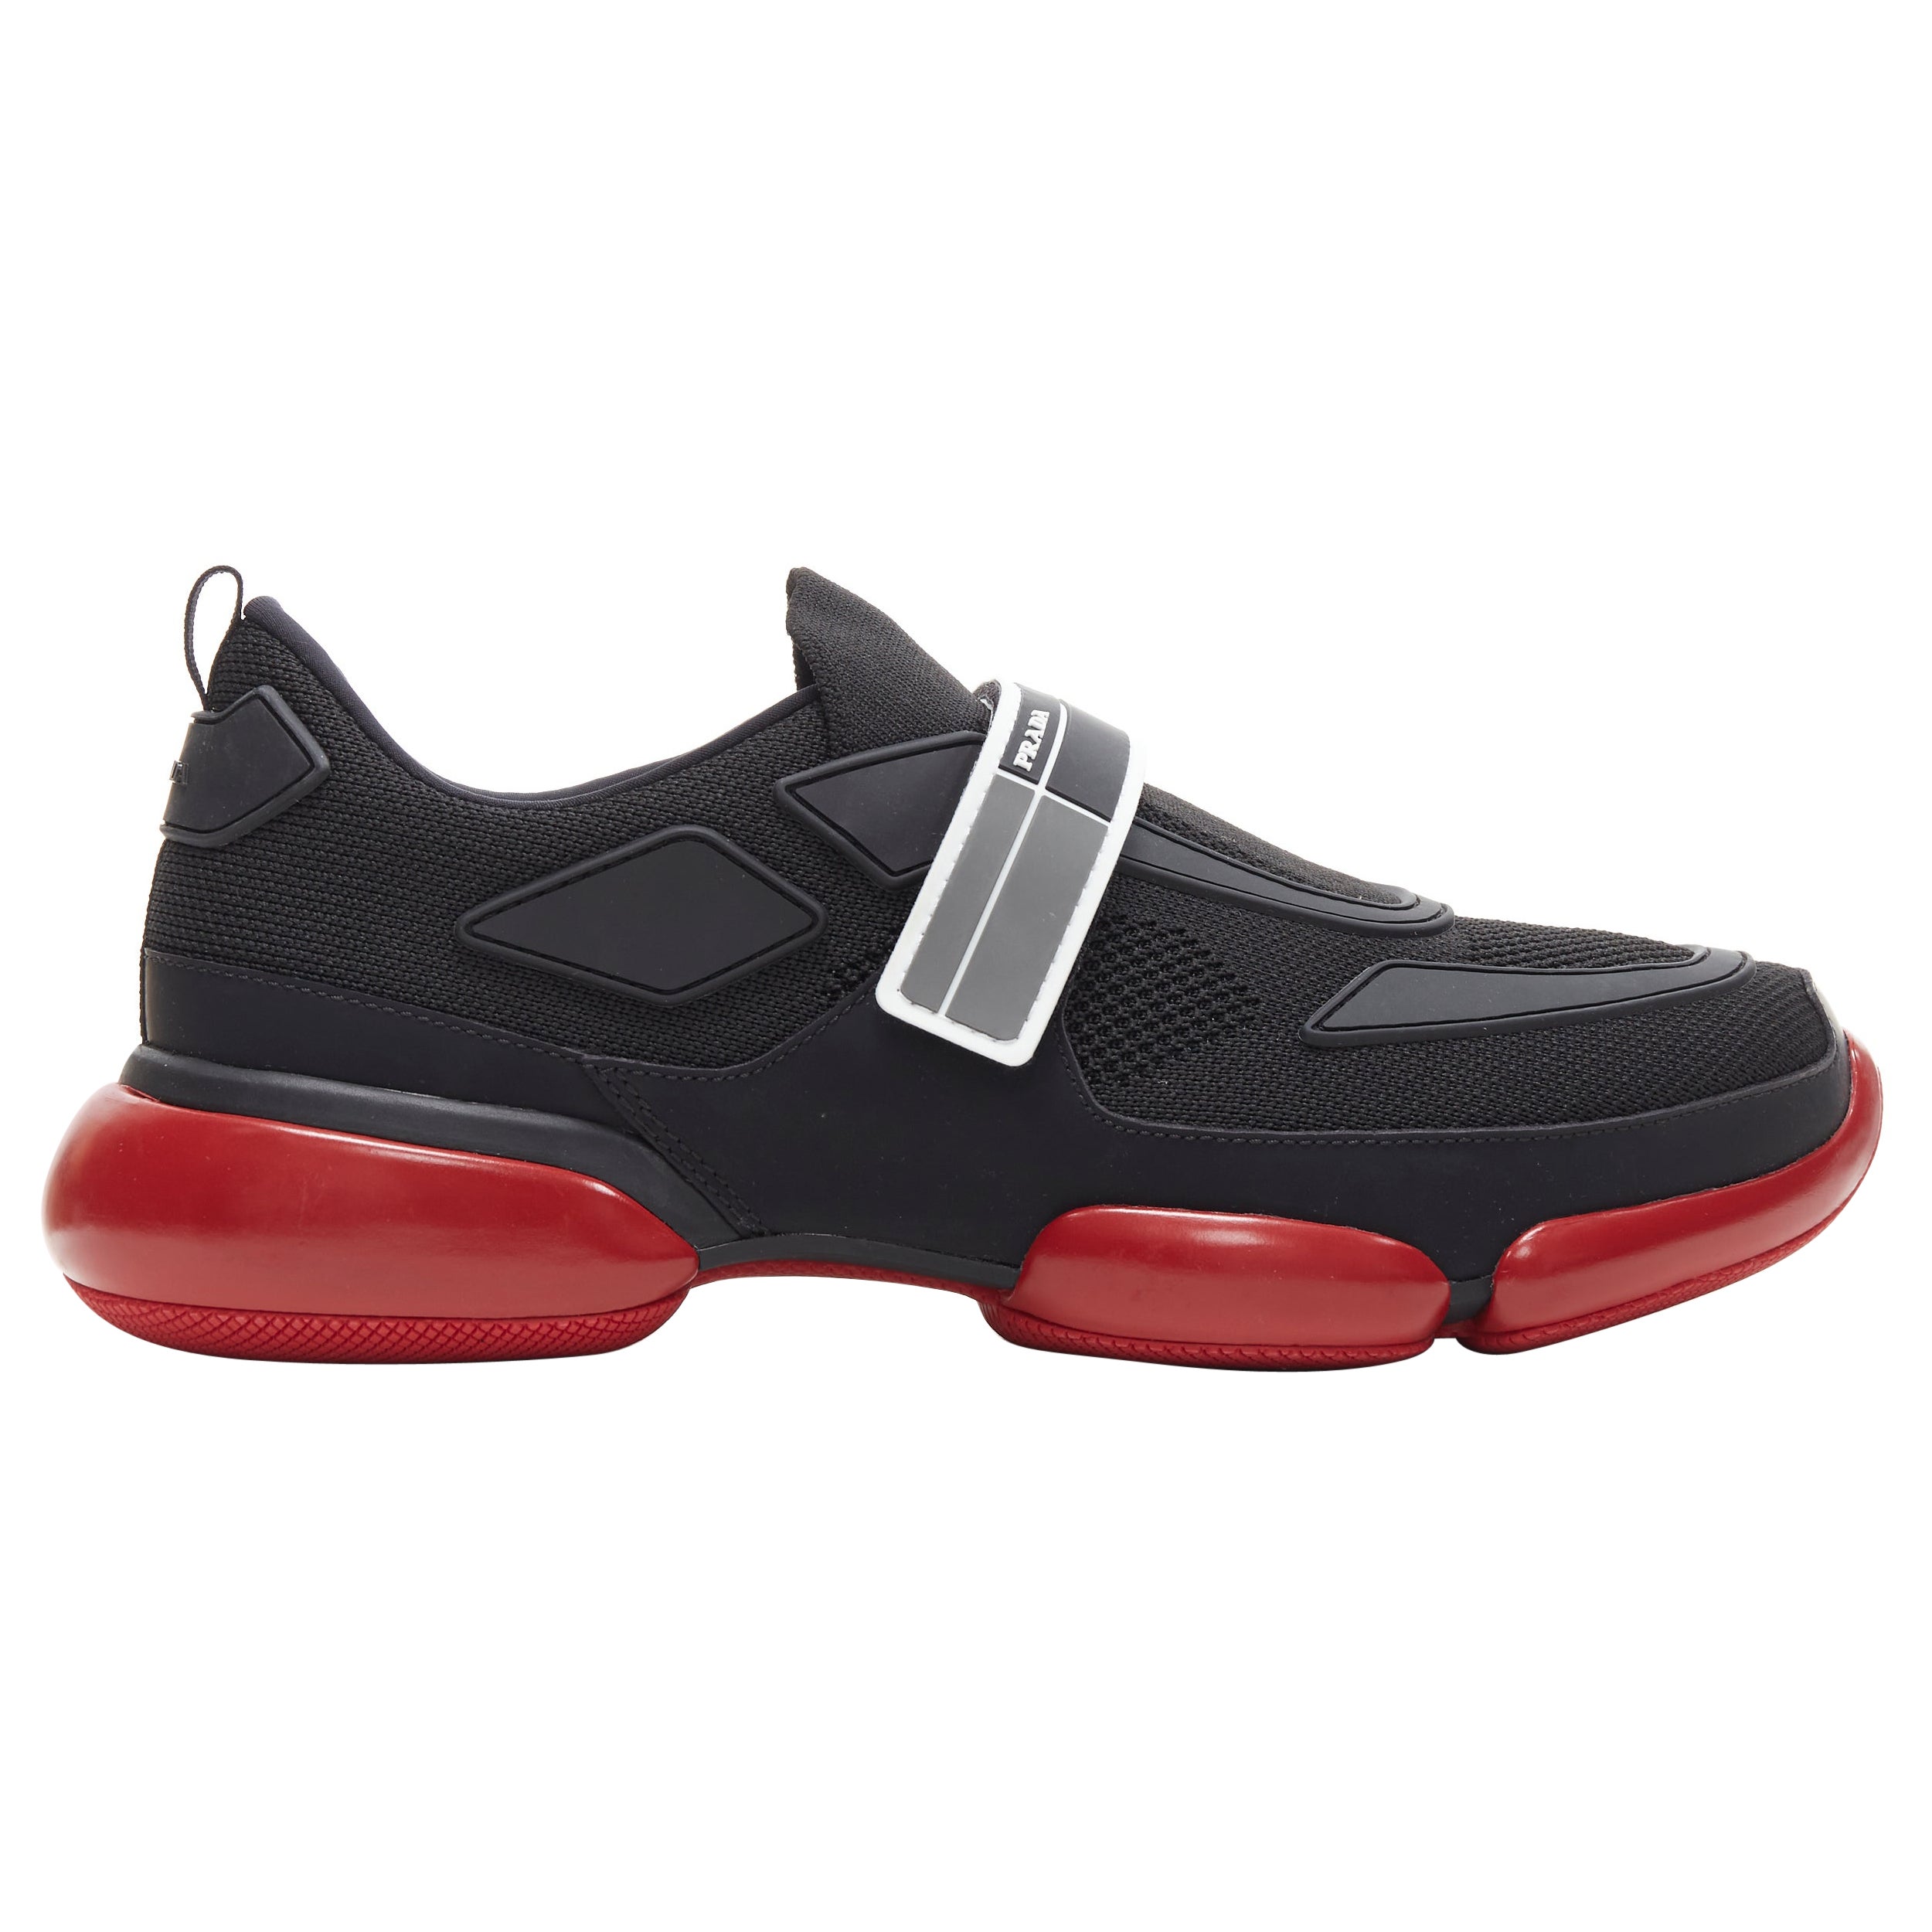 new PRADA Cloudbust black red logo rubber strapped low top sneakers UK7 US8 EU41